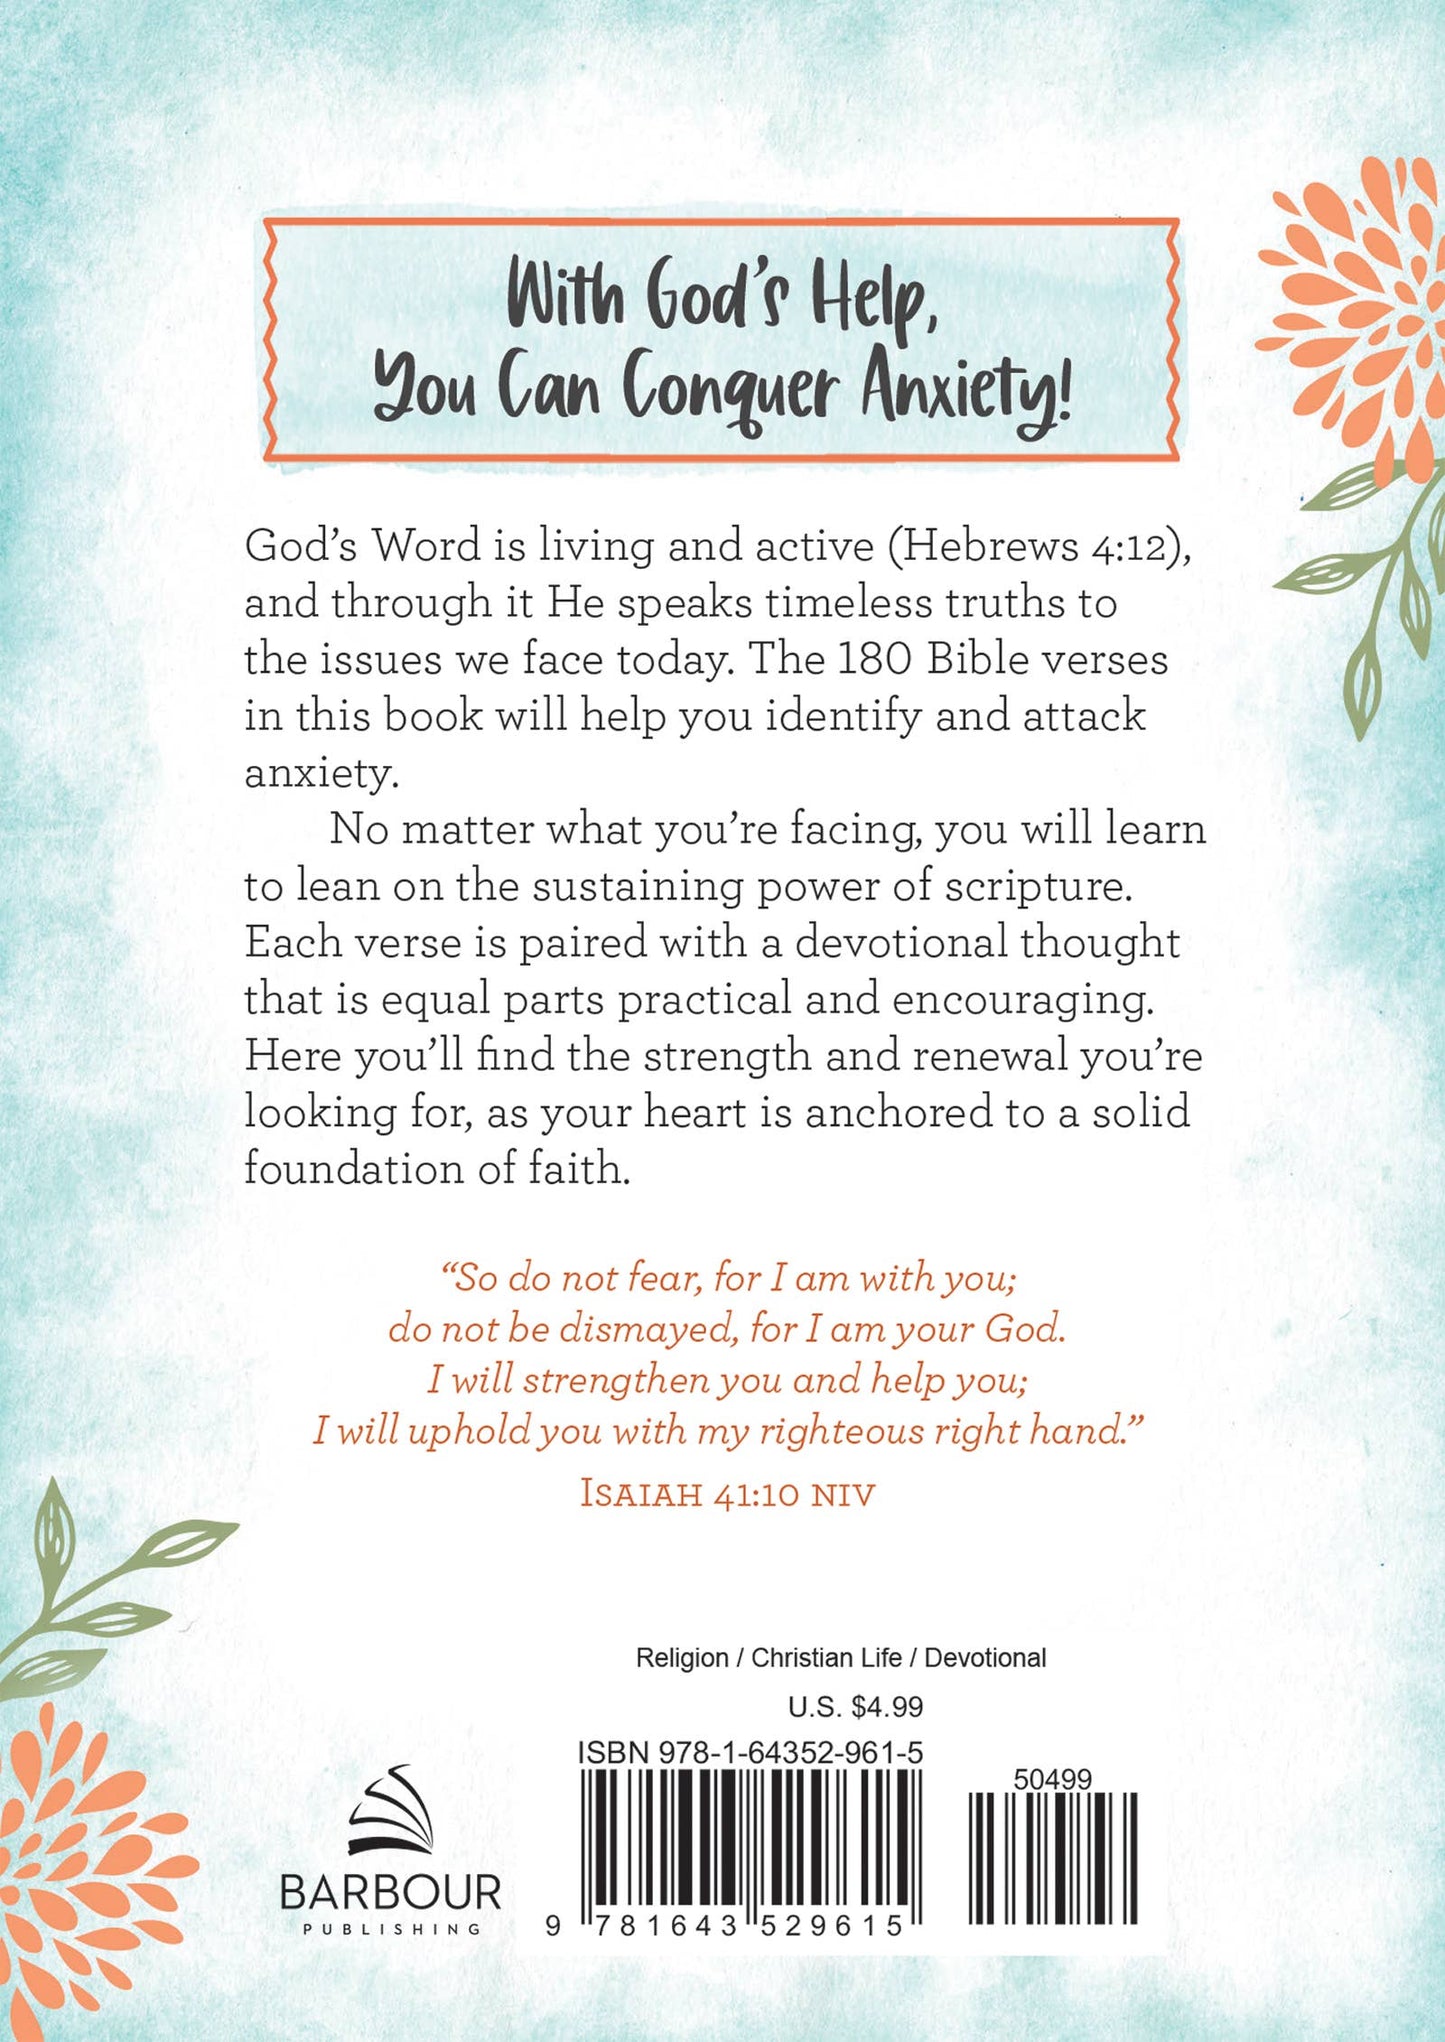 180 Bible Verses for Conquering Anxiety Core Barbour Publishing, Inc.